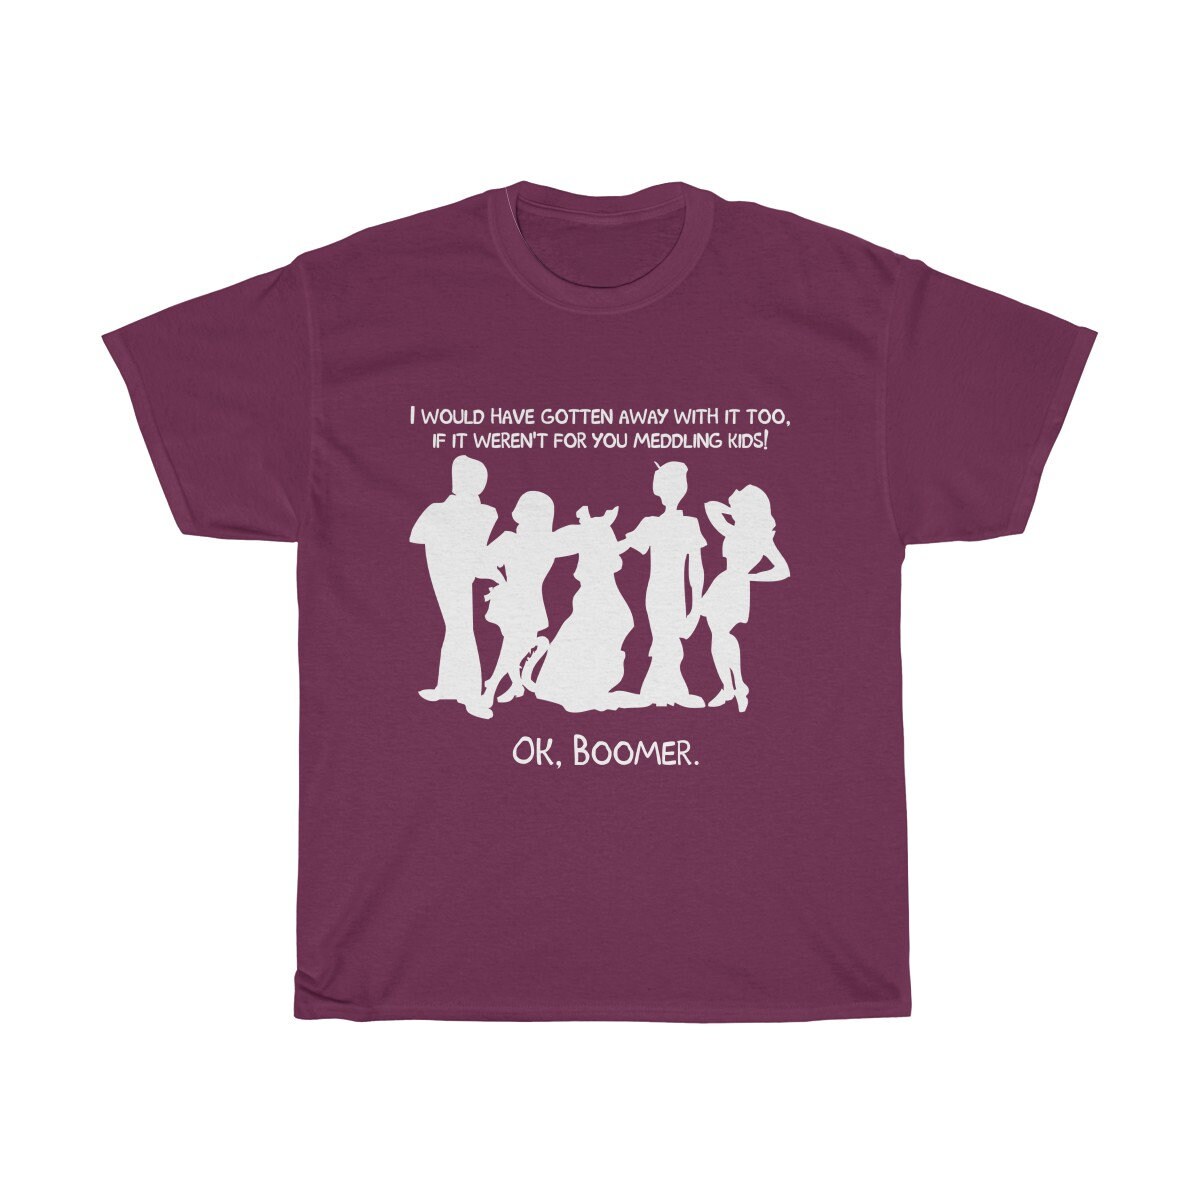 OK Boomer, Dark Colors, Unisex T-shirt, Inspired By Scooby Doo